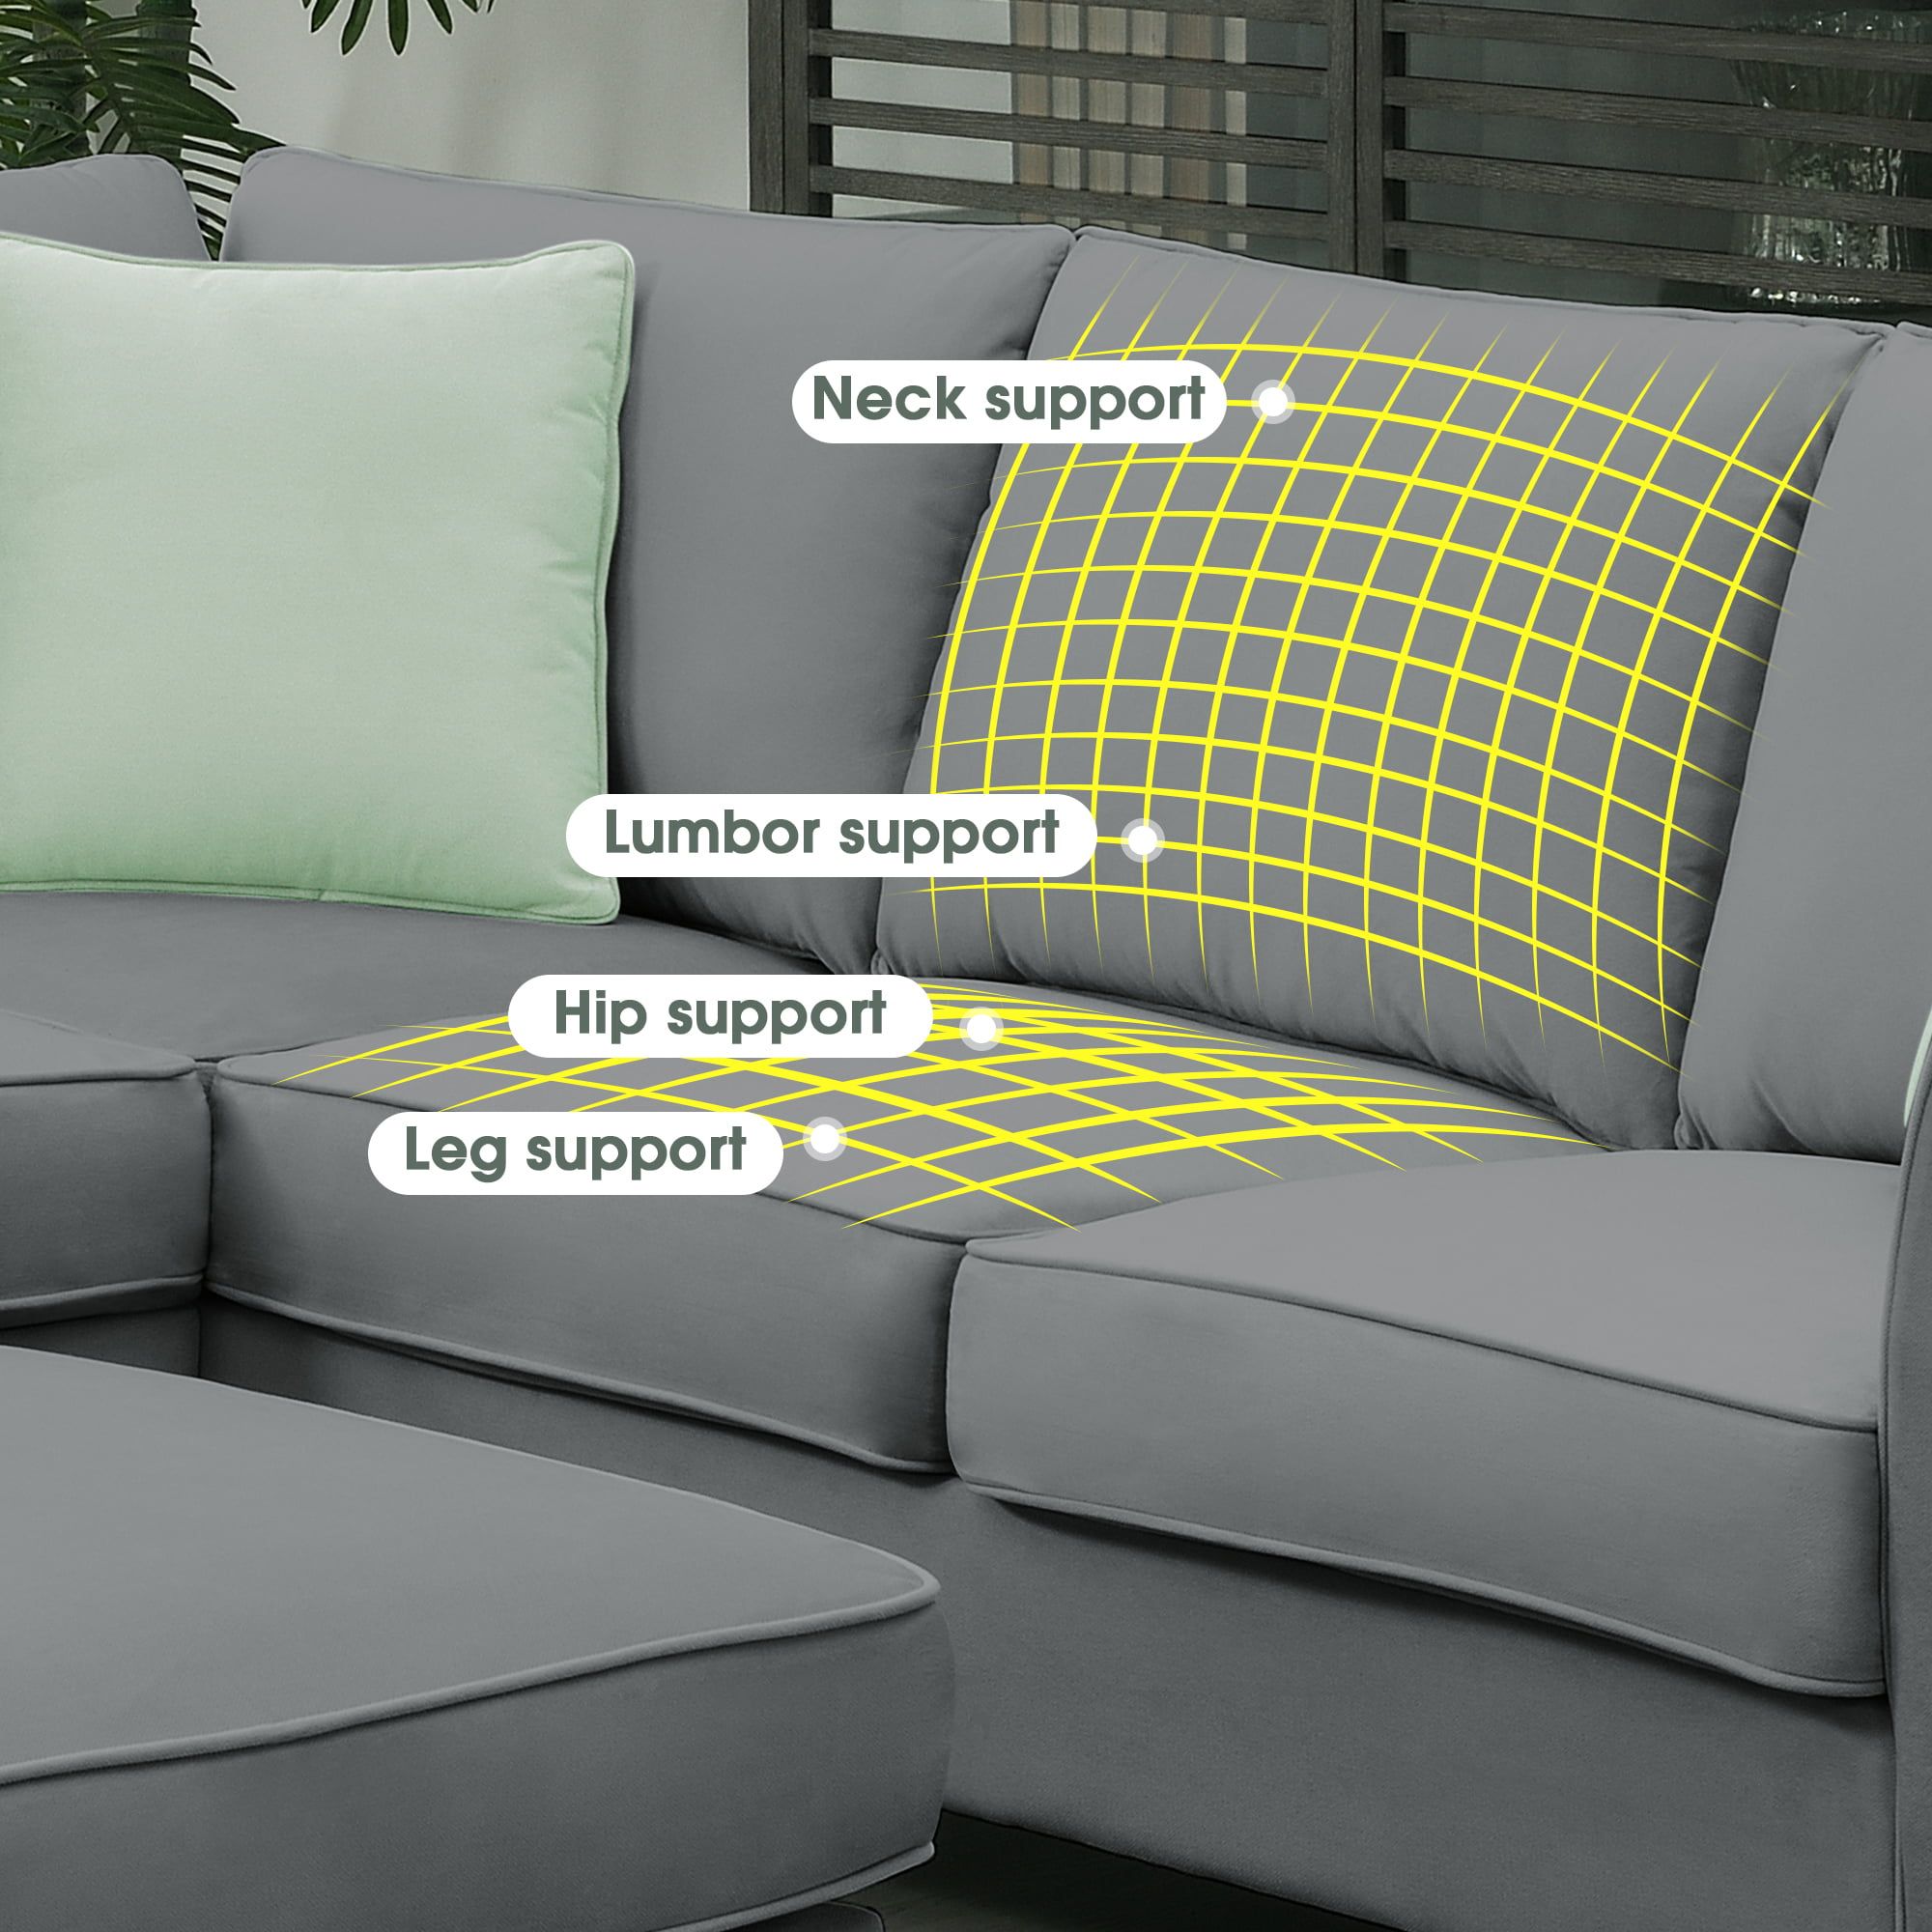 L Shaped Modular Sectional Couch, Kamida 7 Seater Sectional Couch With  Ottoman And 3 Pillows, Modern L Shaped Fabric Upholstered Couch Furniture,  Heavy Duty Sectional Couch For Living Room, Gray – Walmart For 7 Seater Sectional Couch With Ottoman And 3 Pillows (View 5 of 15)